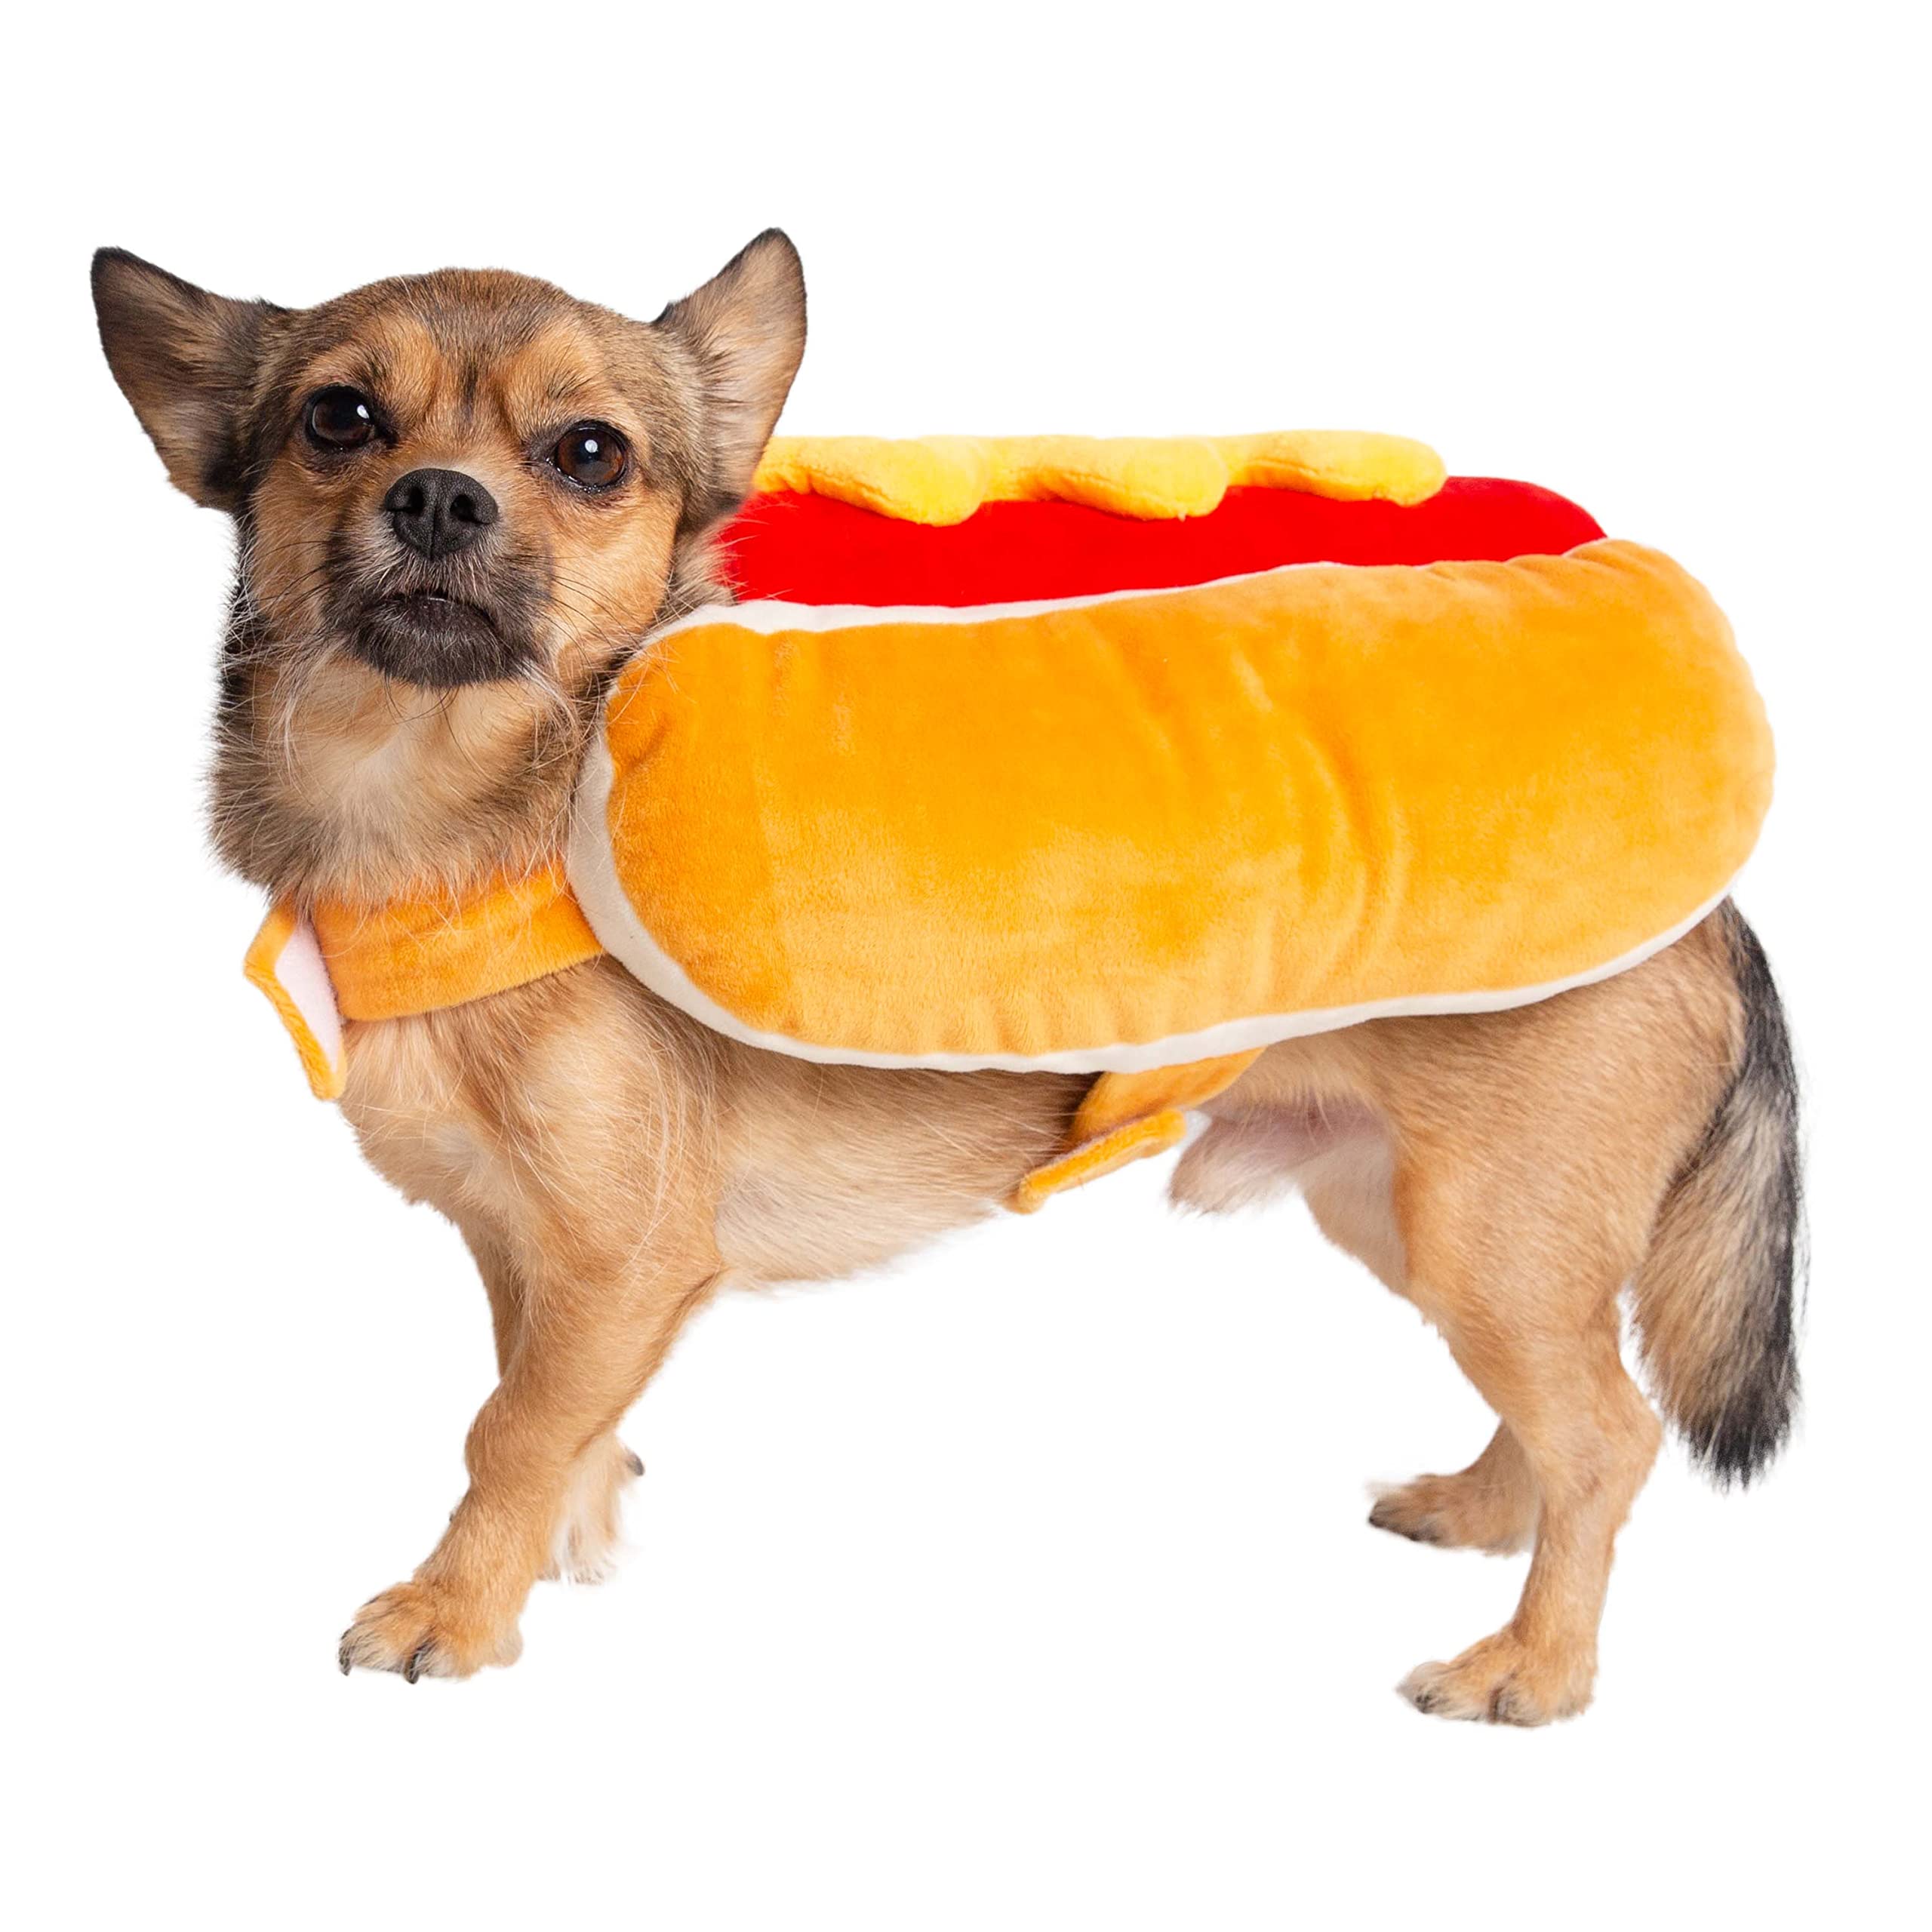 Pet Krewe Hot Dog Costume for Cats and Dogs | Pet Wiener Costume for Dogs 1st Birthday, National Cat Day & Celebrations | Halloween Outfit for Small and Large Cats & Dogs  - Like New